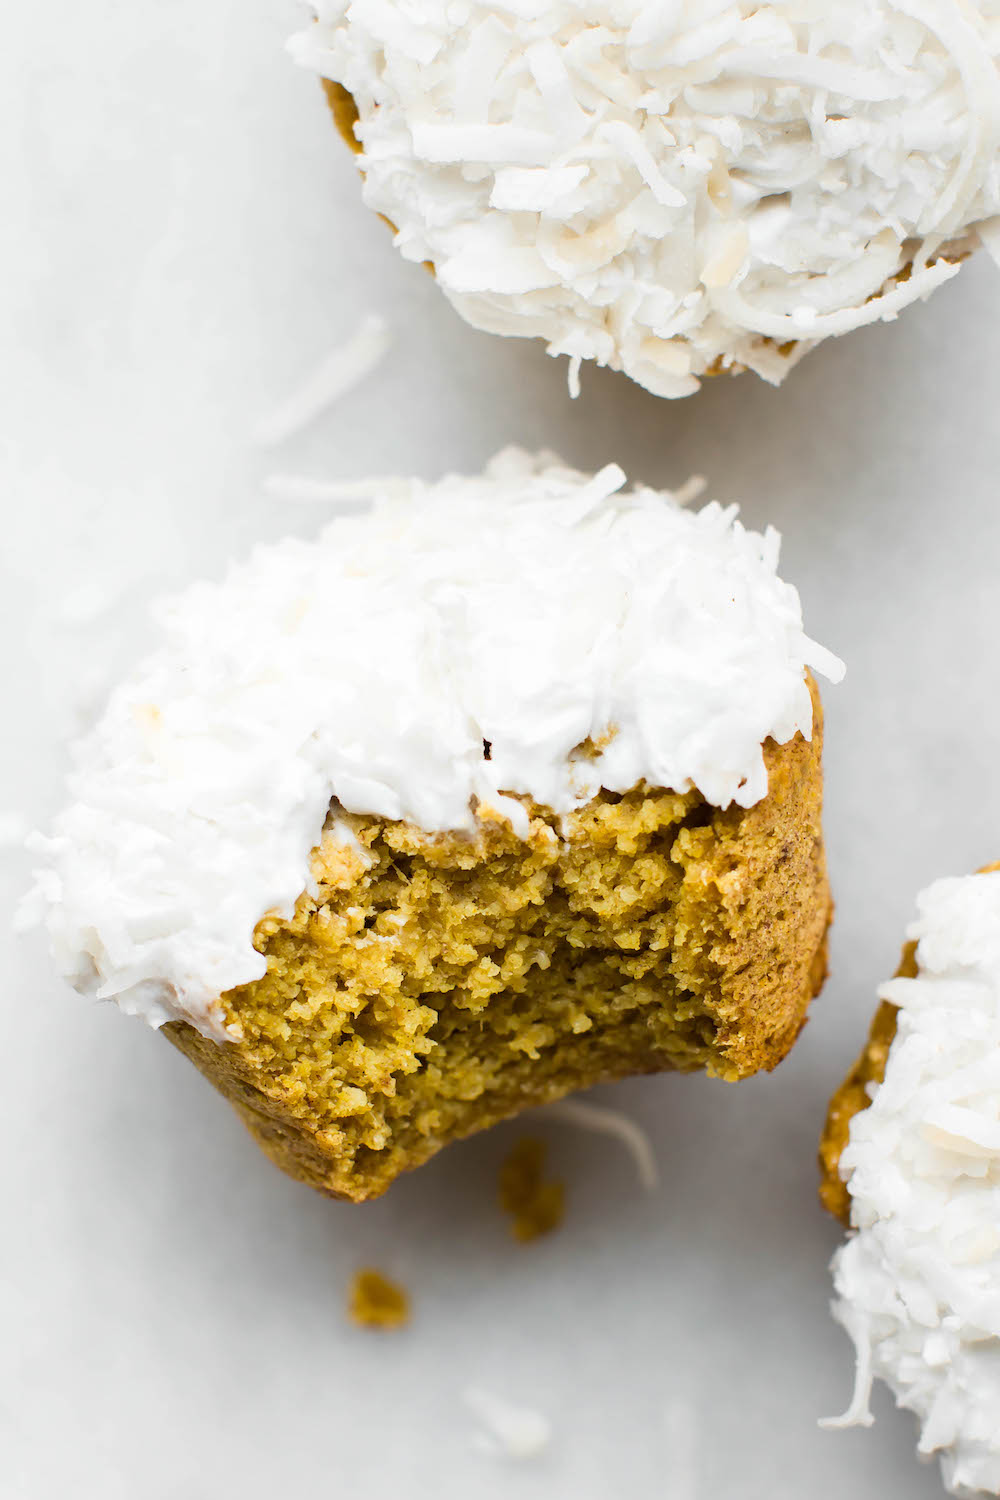 Pineapple Turmeric Cupcakes with Coconut Frosting